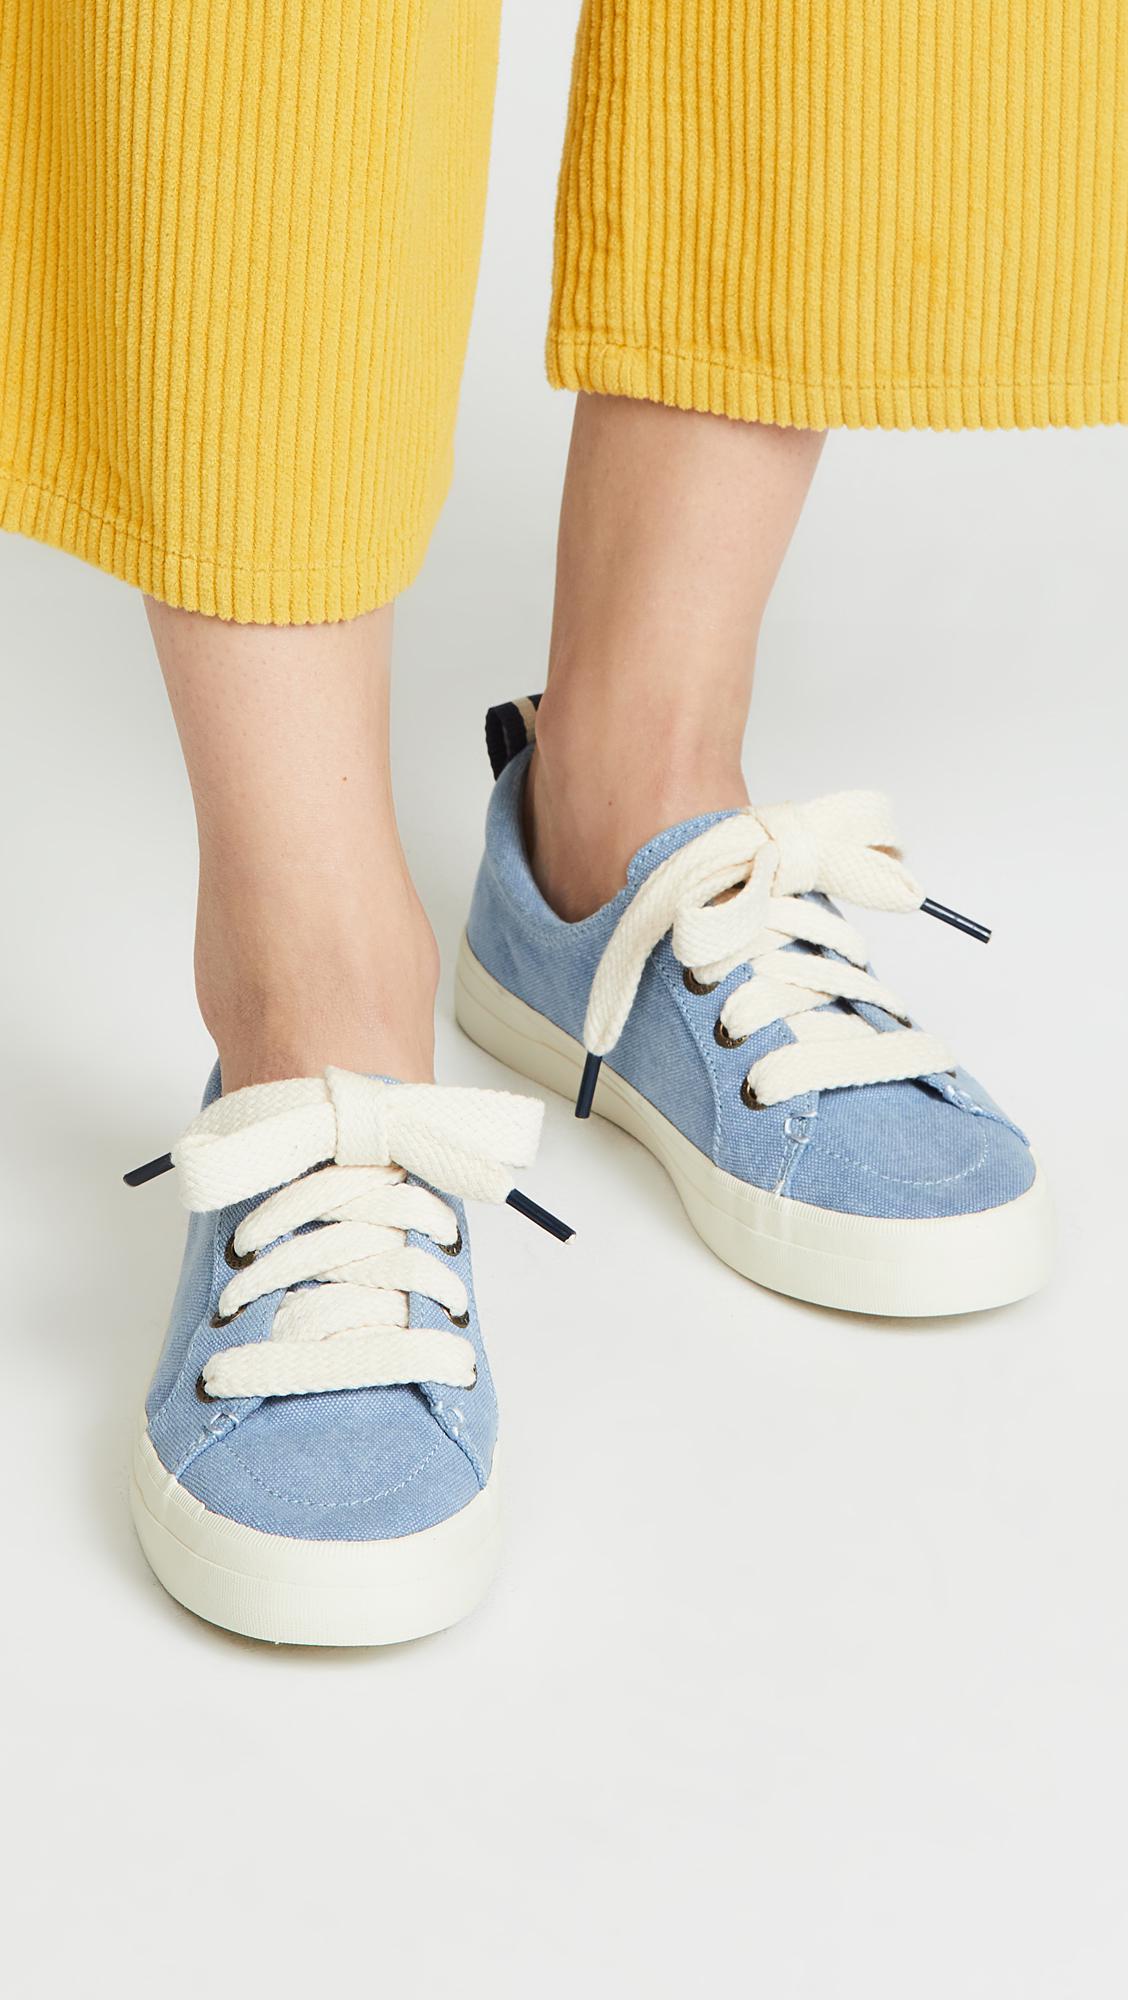 sperry crest vibe chubby lace